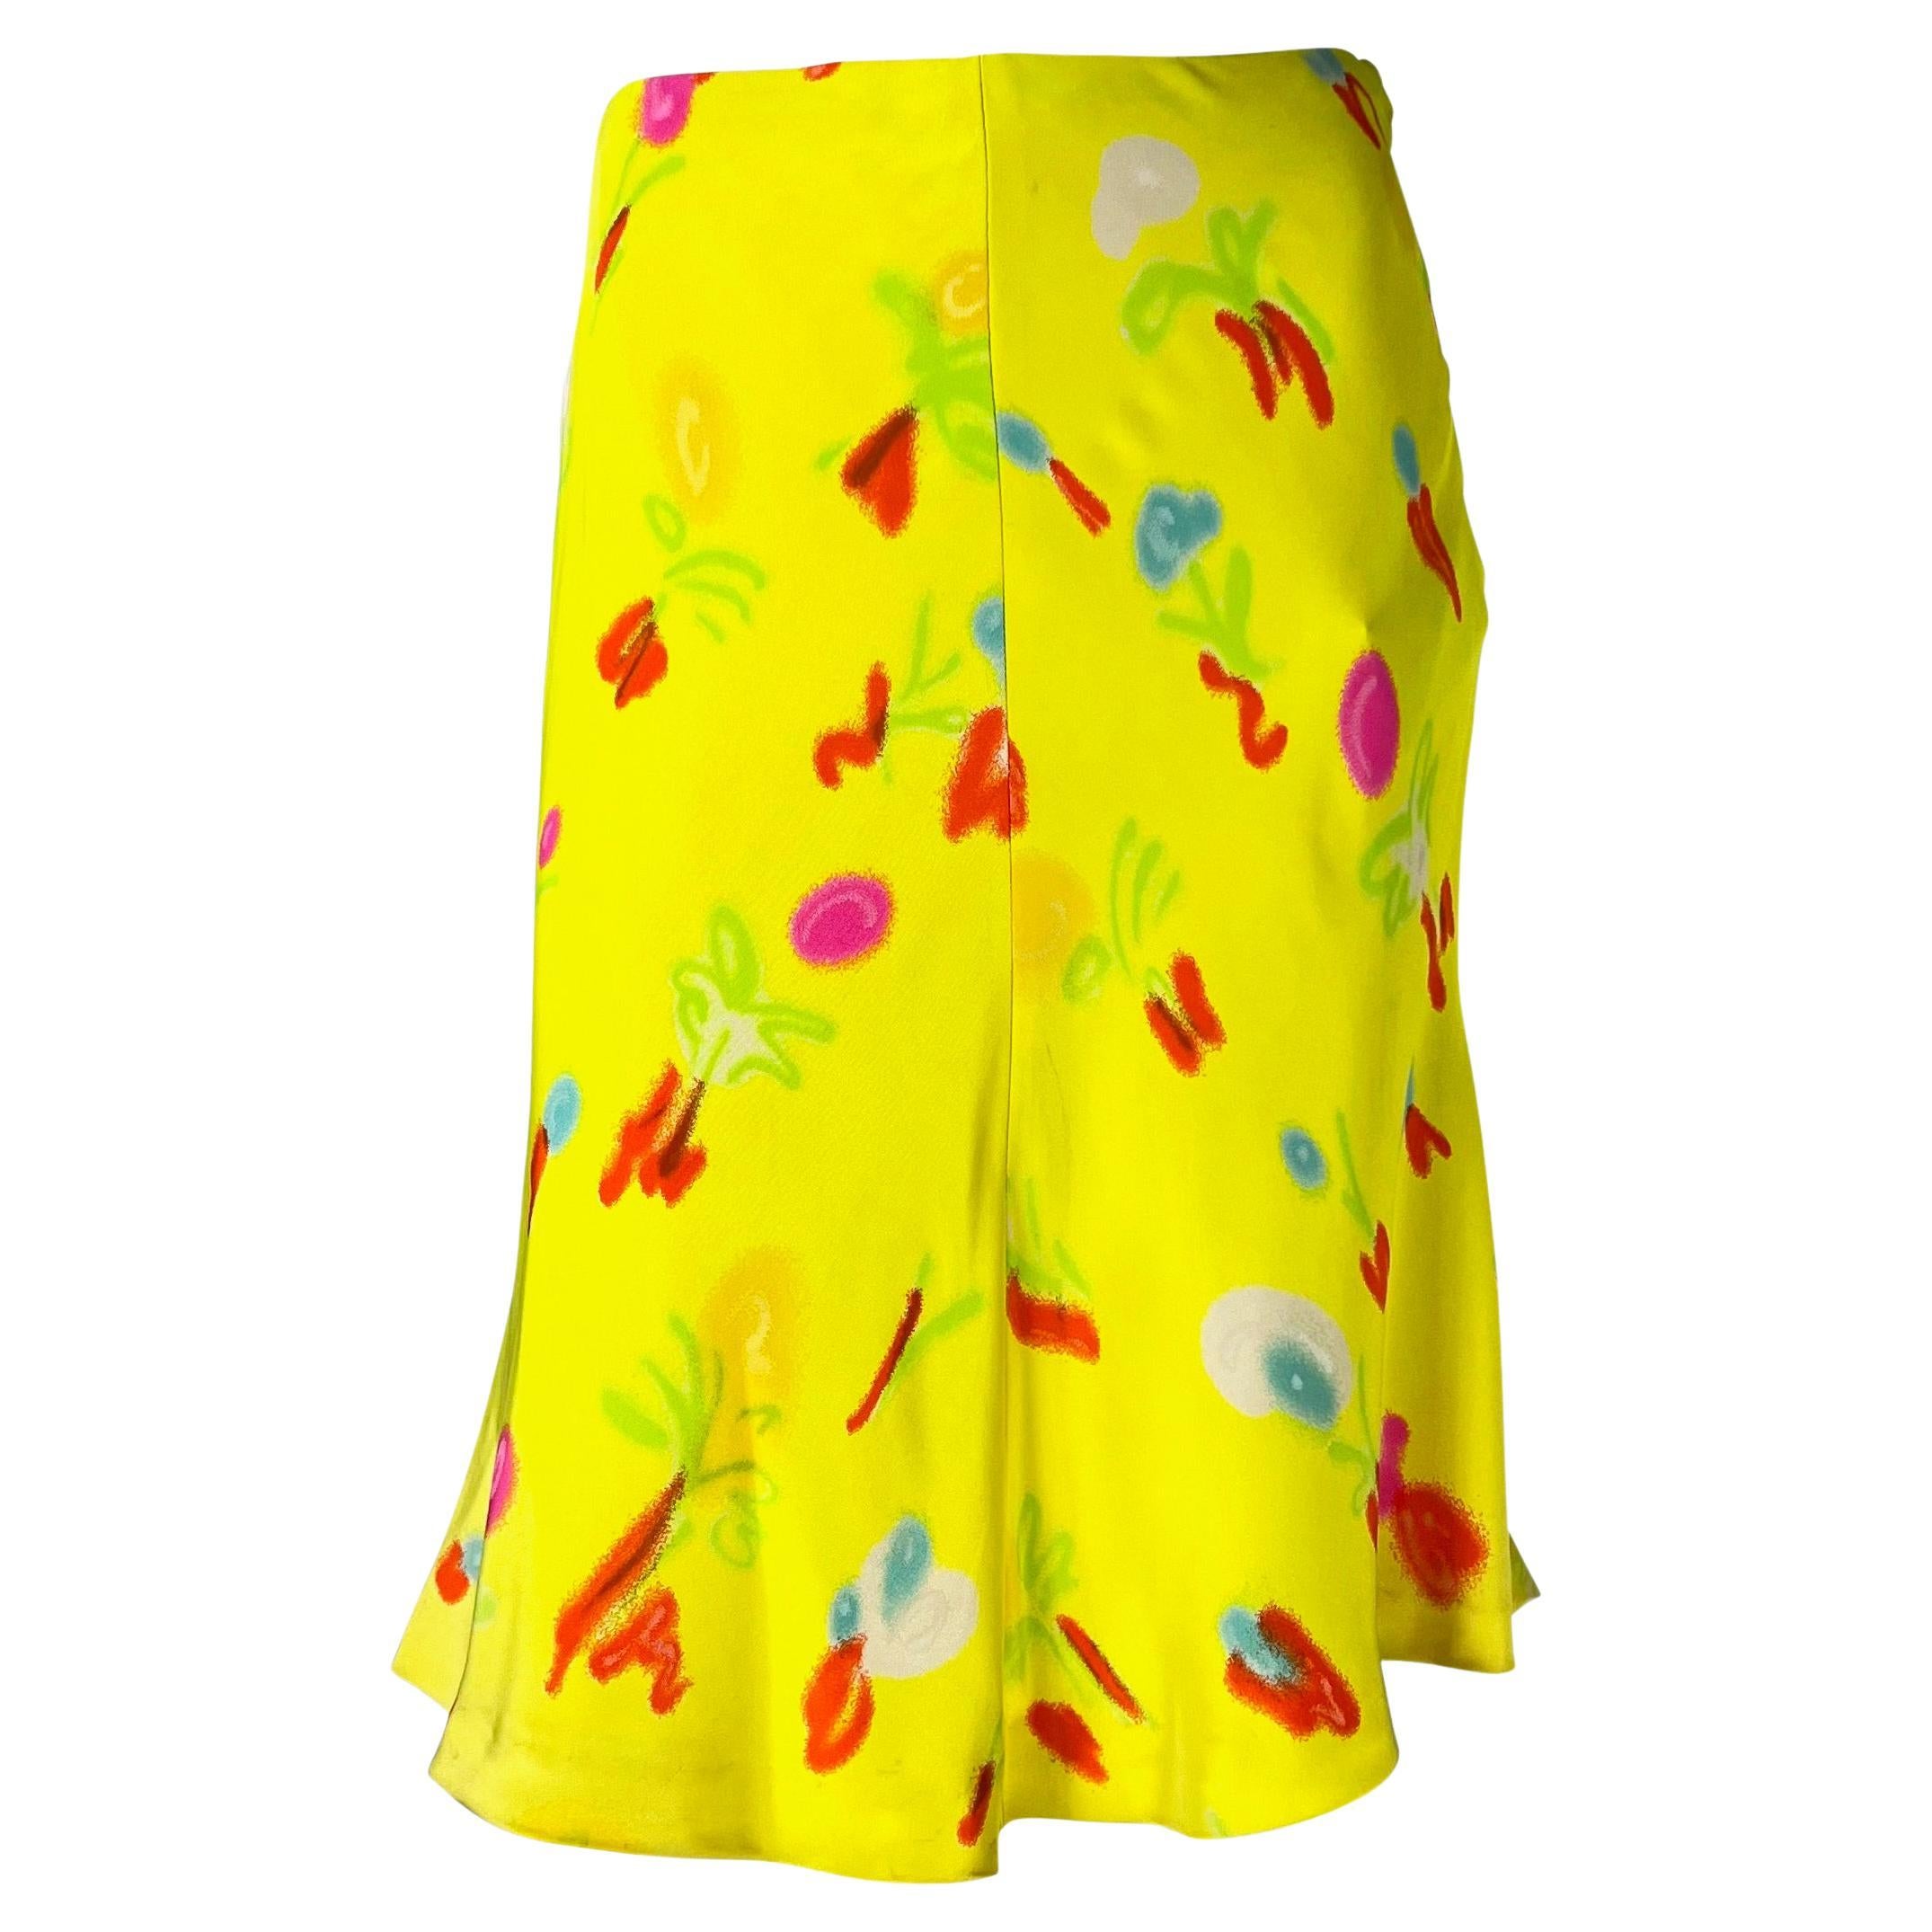 NWT S/S 1996 Gianni Versace Couture Neon Yellow Graffiti Floral Print Jupe